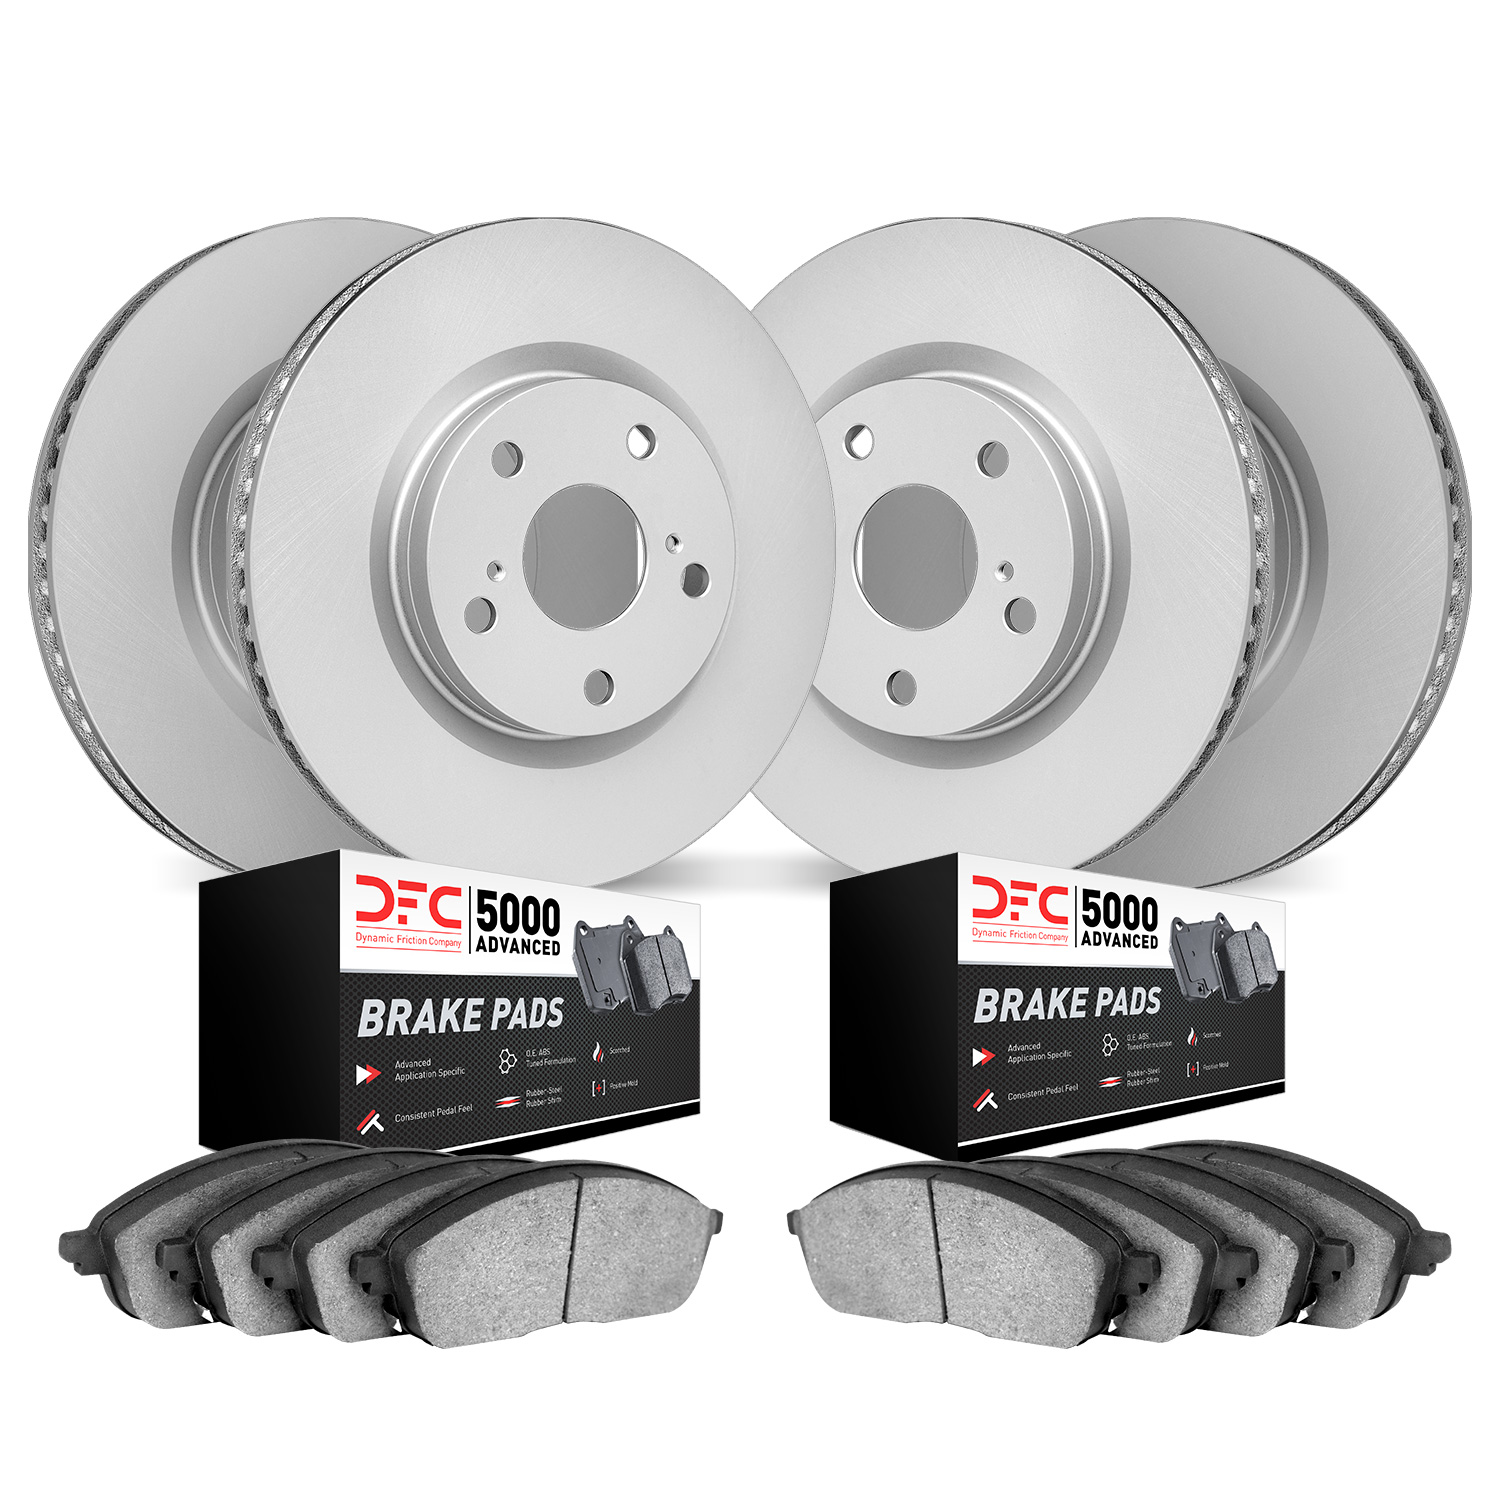 4504-46035 Geospec Brake Rotors w/5000 Advanced Brake Pads Kit, 2005-2010 GM, Position: Front and Rear